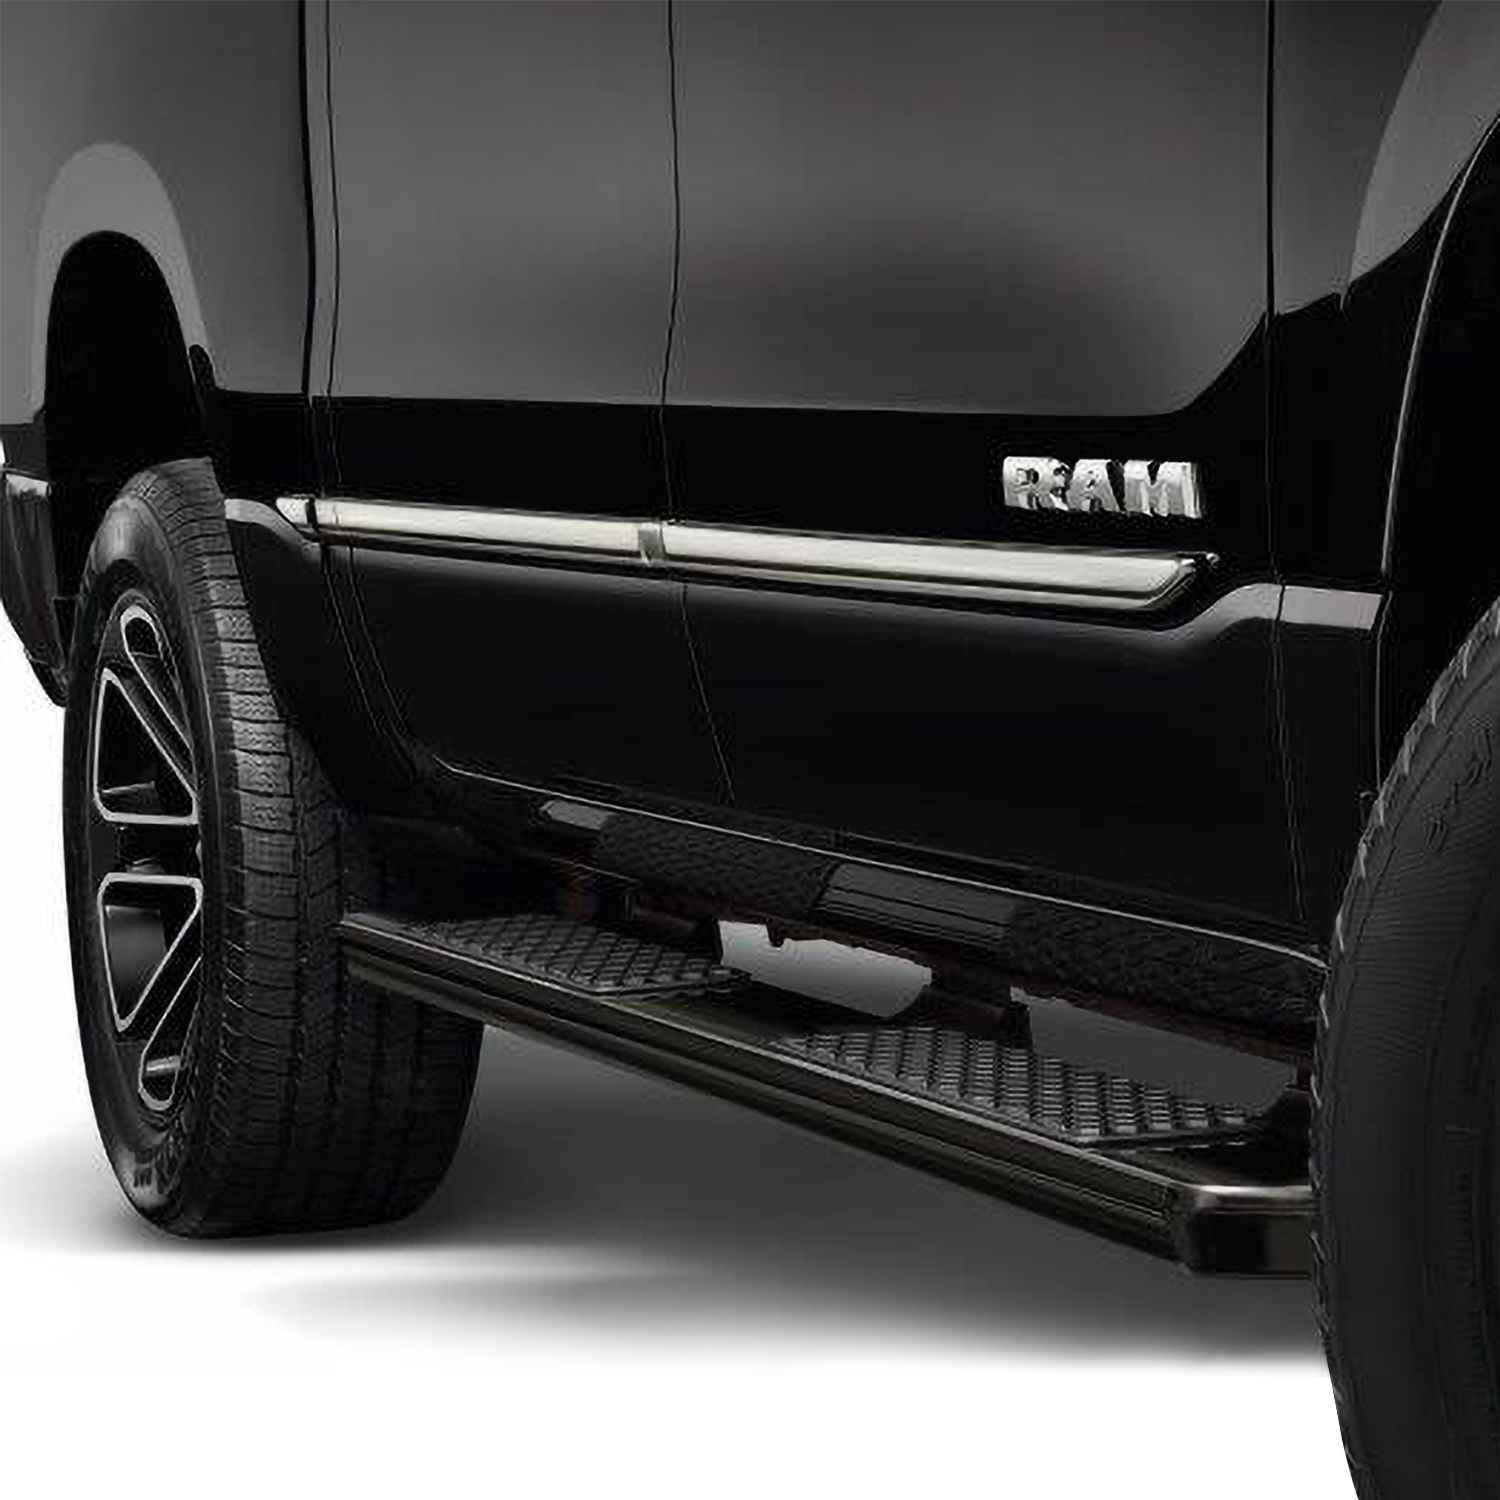 OEM 2019 Ram 1500 Chrome Bodyside Moldings - Crew Cab with 5' 7 Bed